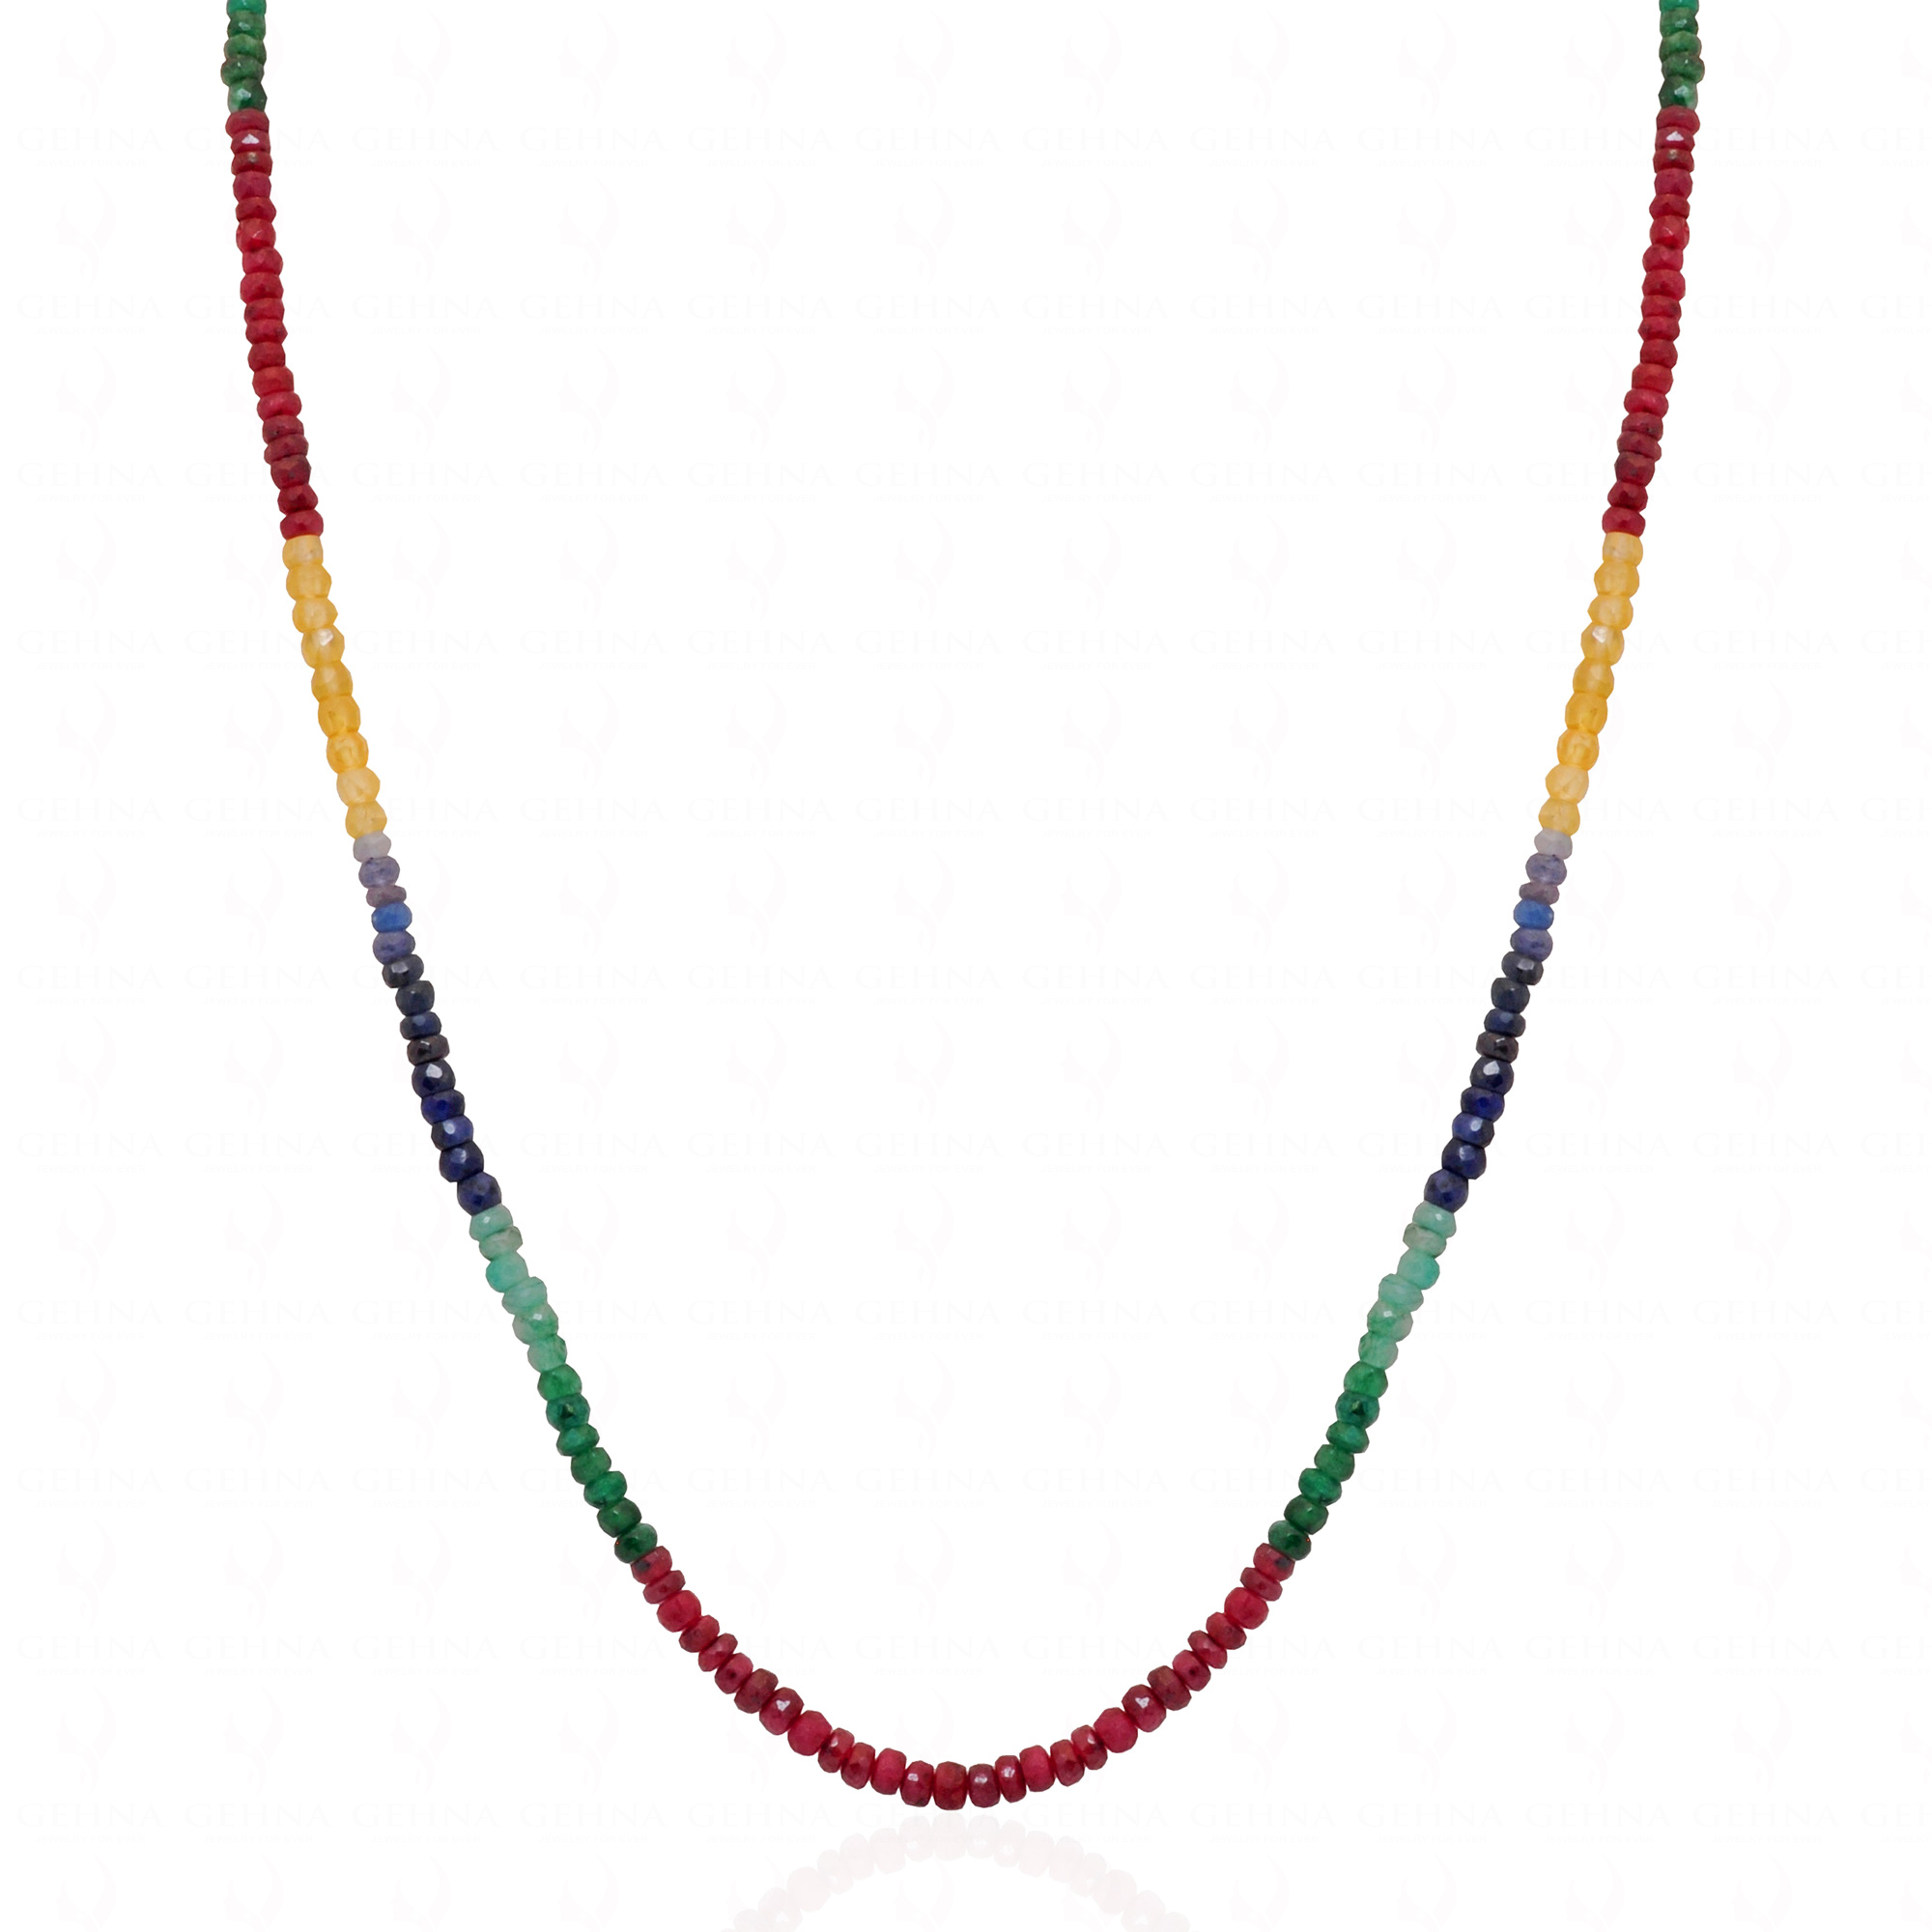 Ruby Emerald Sapphire Gemstone Faceted Bead Necklace NP-1488